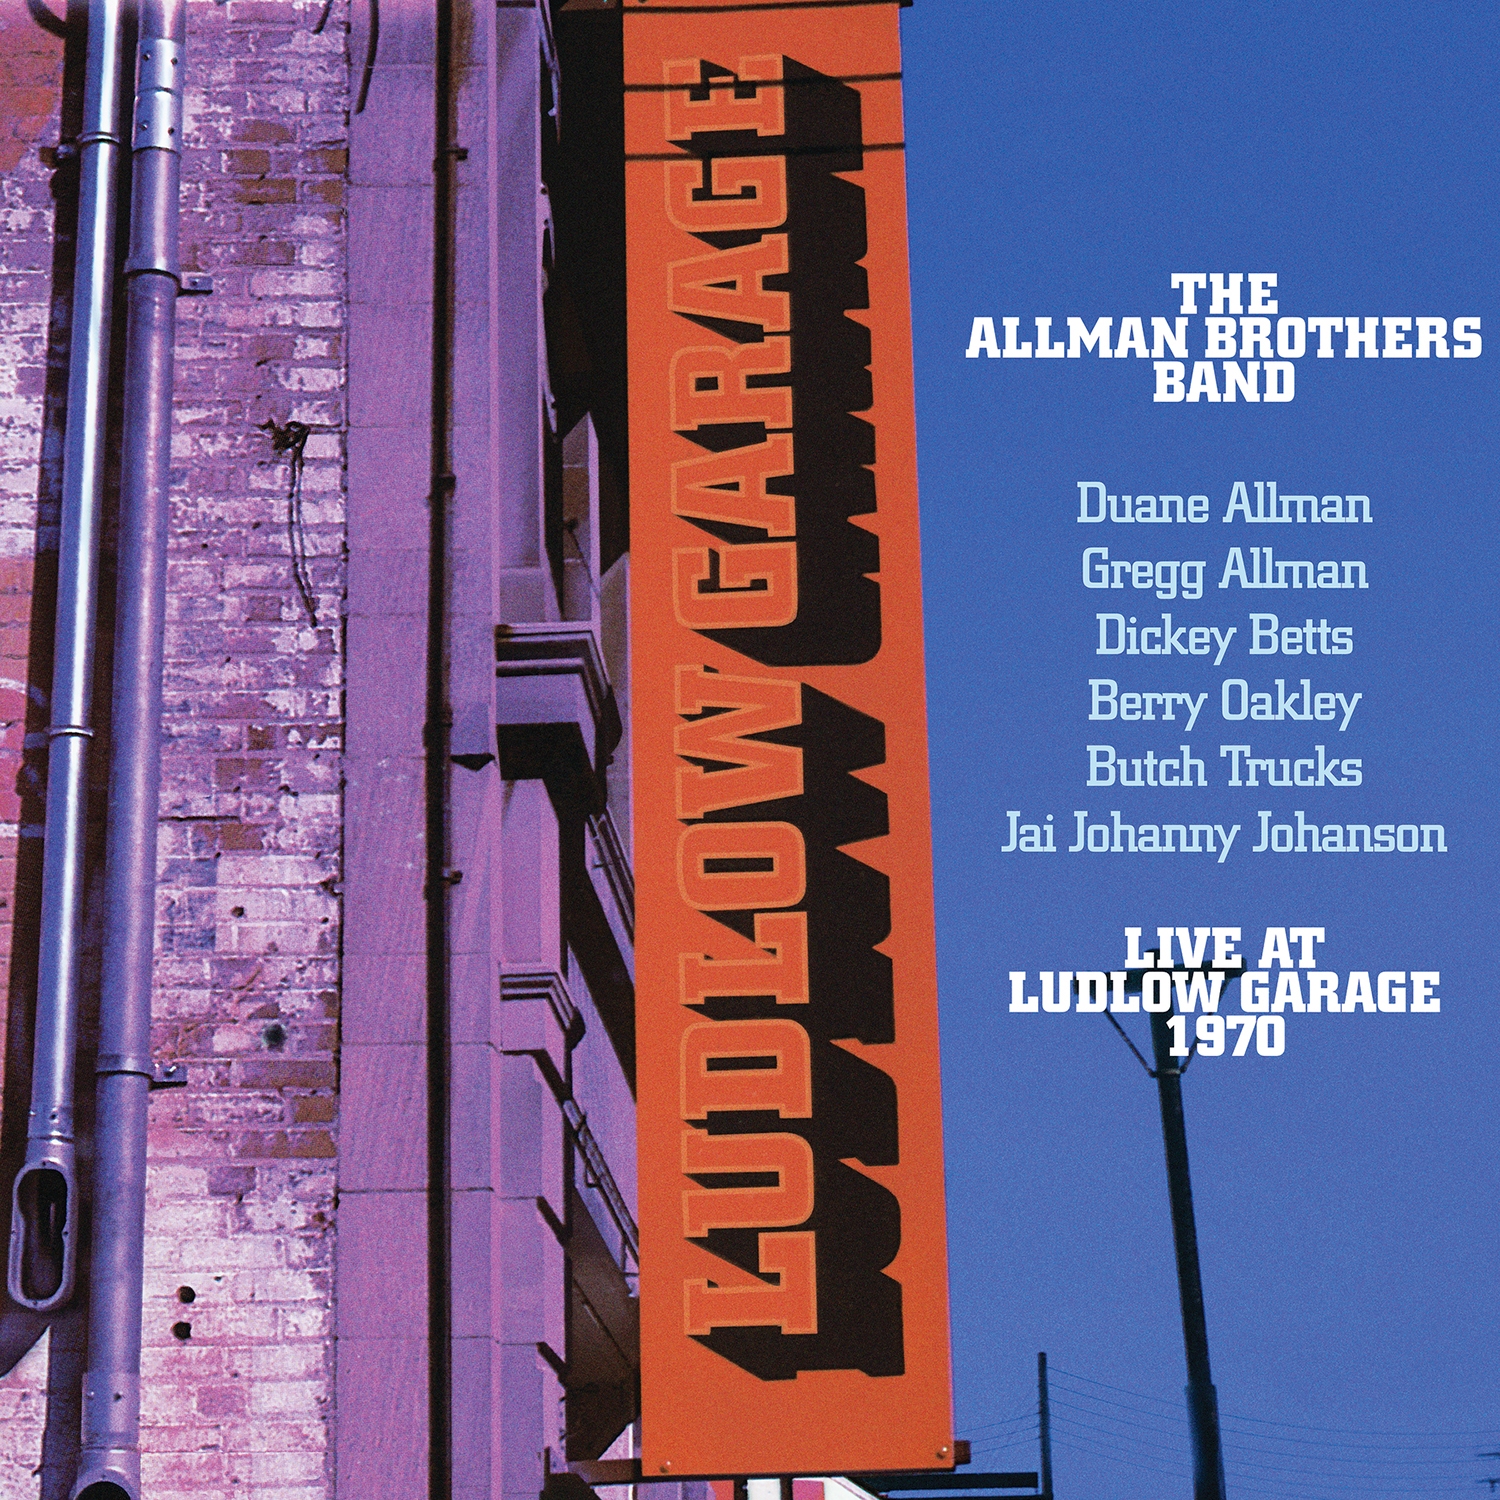 Allman Brothers Band - 1990 - Live At Ludlow Garage 1970 [2021] 24-192